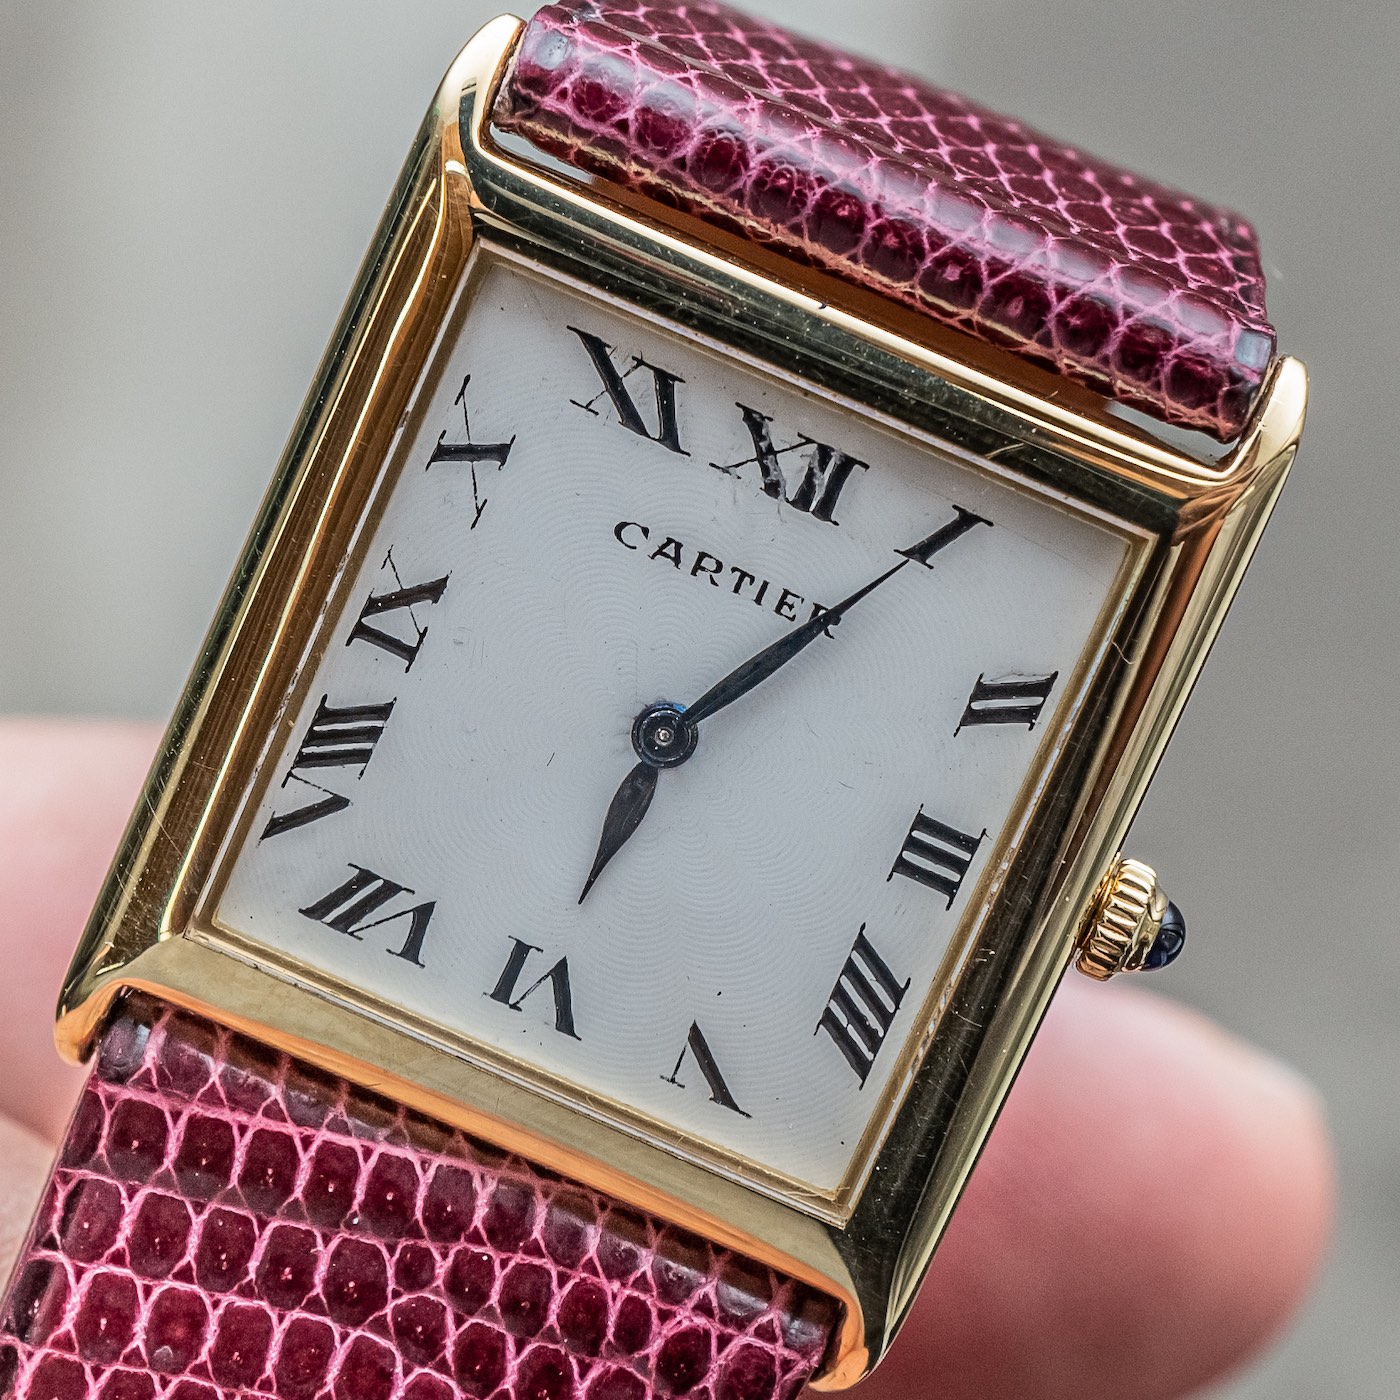 Vintage Cartier Watches From Harry Fane 